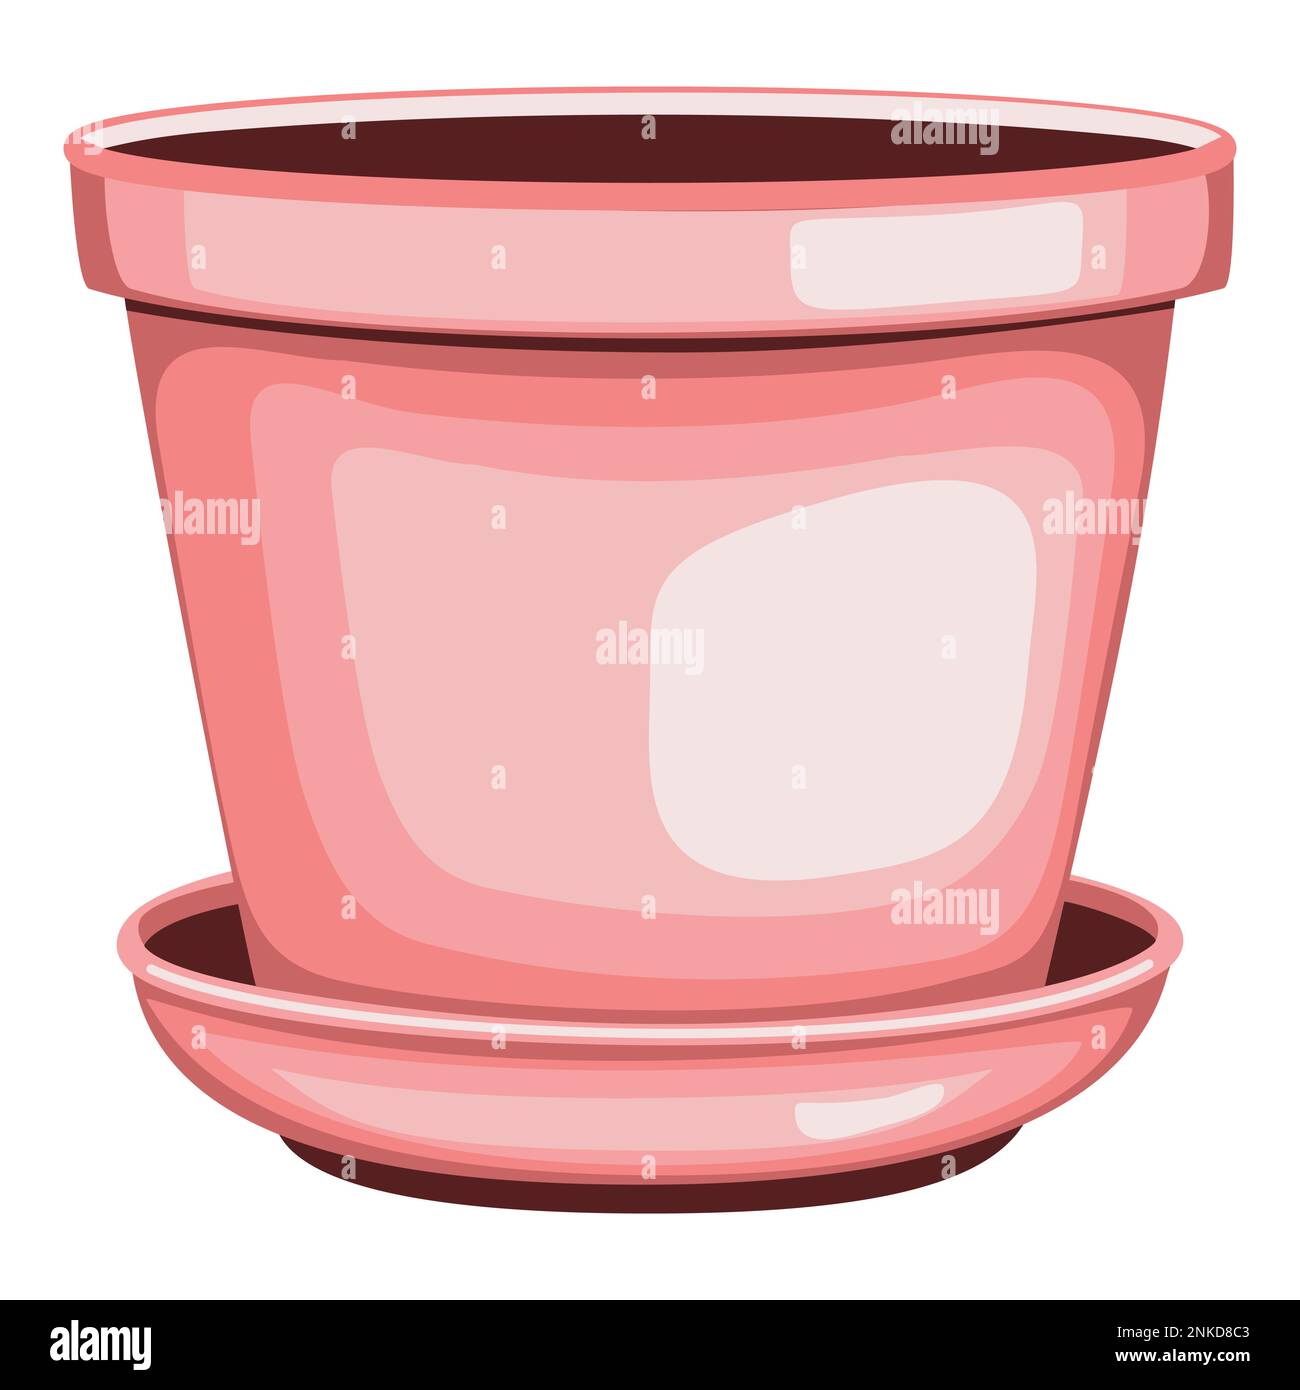 Ceramic flower pot with stand in flat technique vector illustration Stock Vector